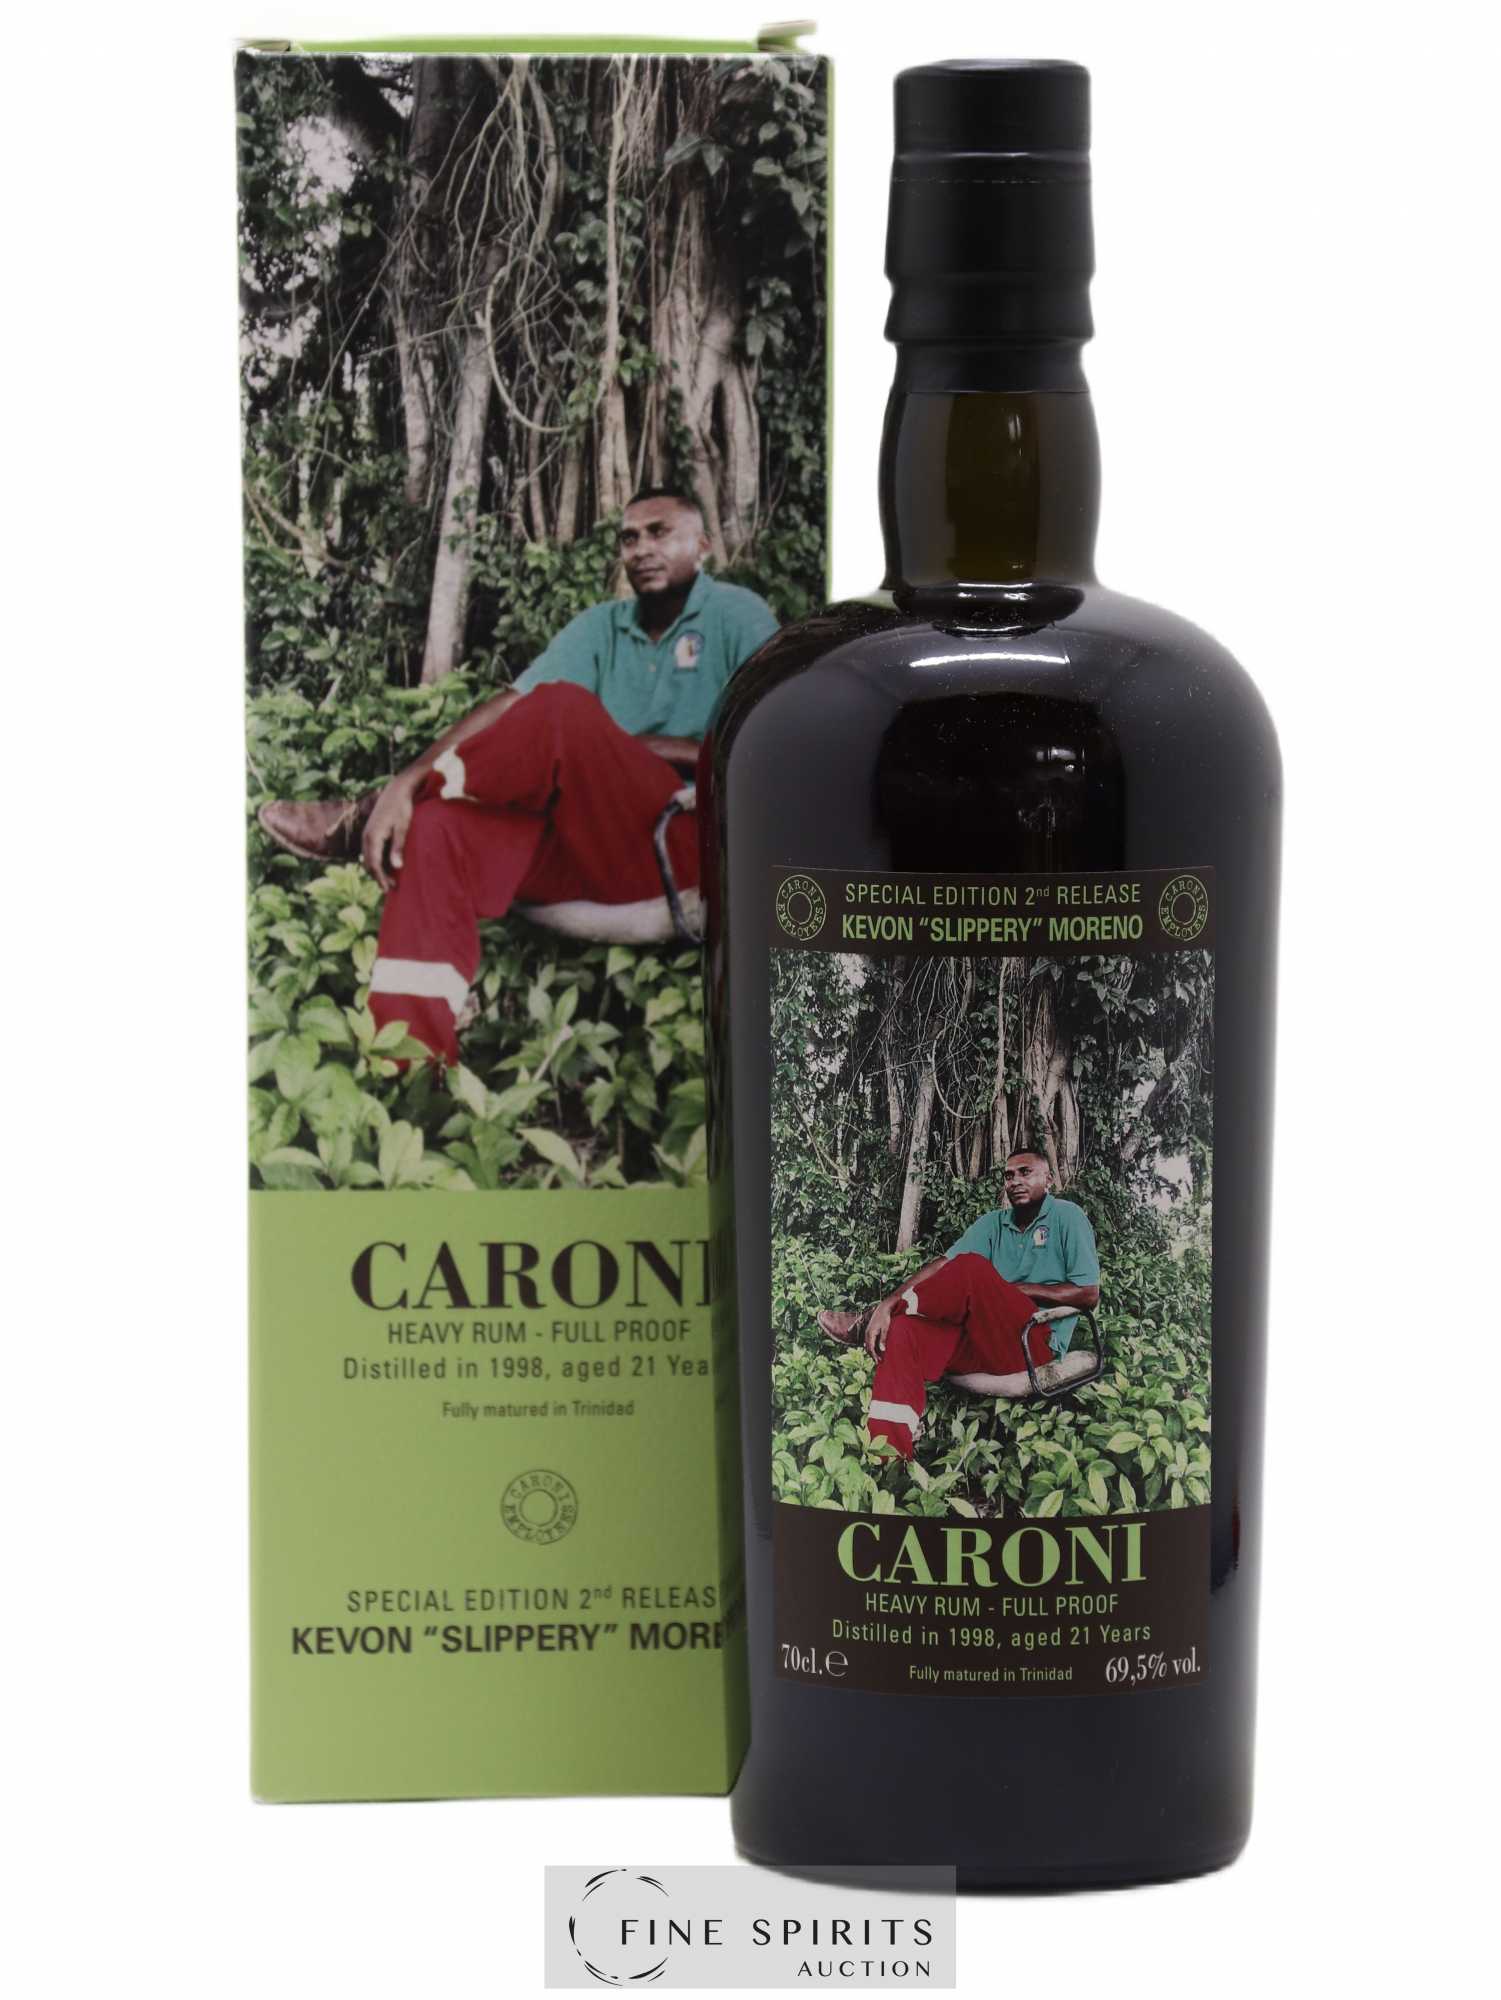 Caroni 21 years 1998 Velier Special Edition Kevon Slippery Moreno 2nd Release - One of 1400 - bottled 2019 Employee Serie 